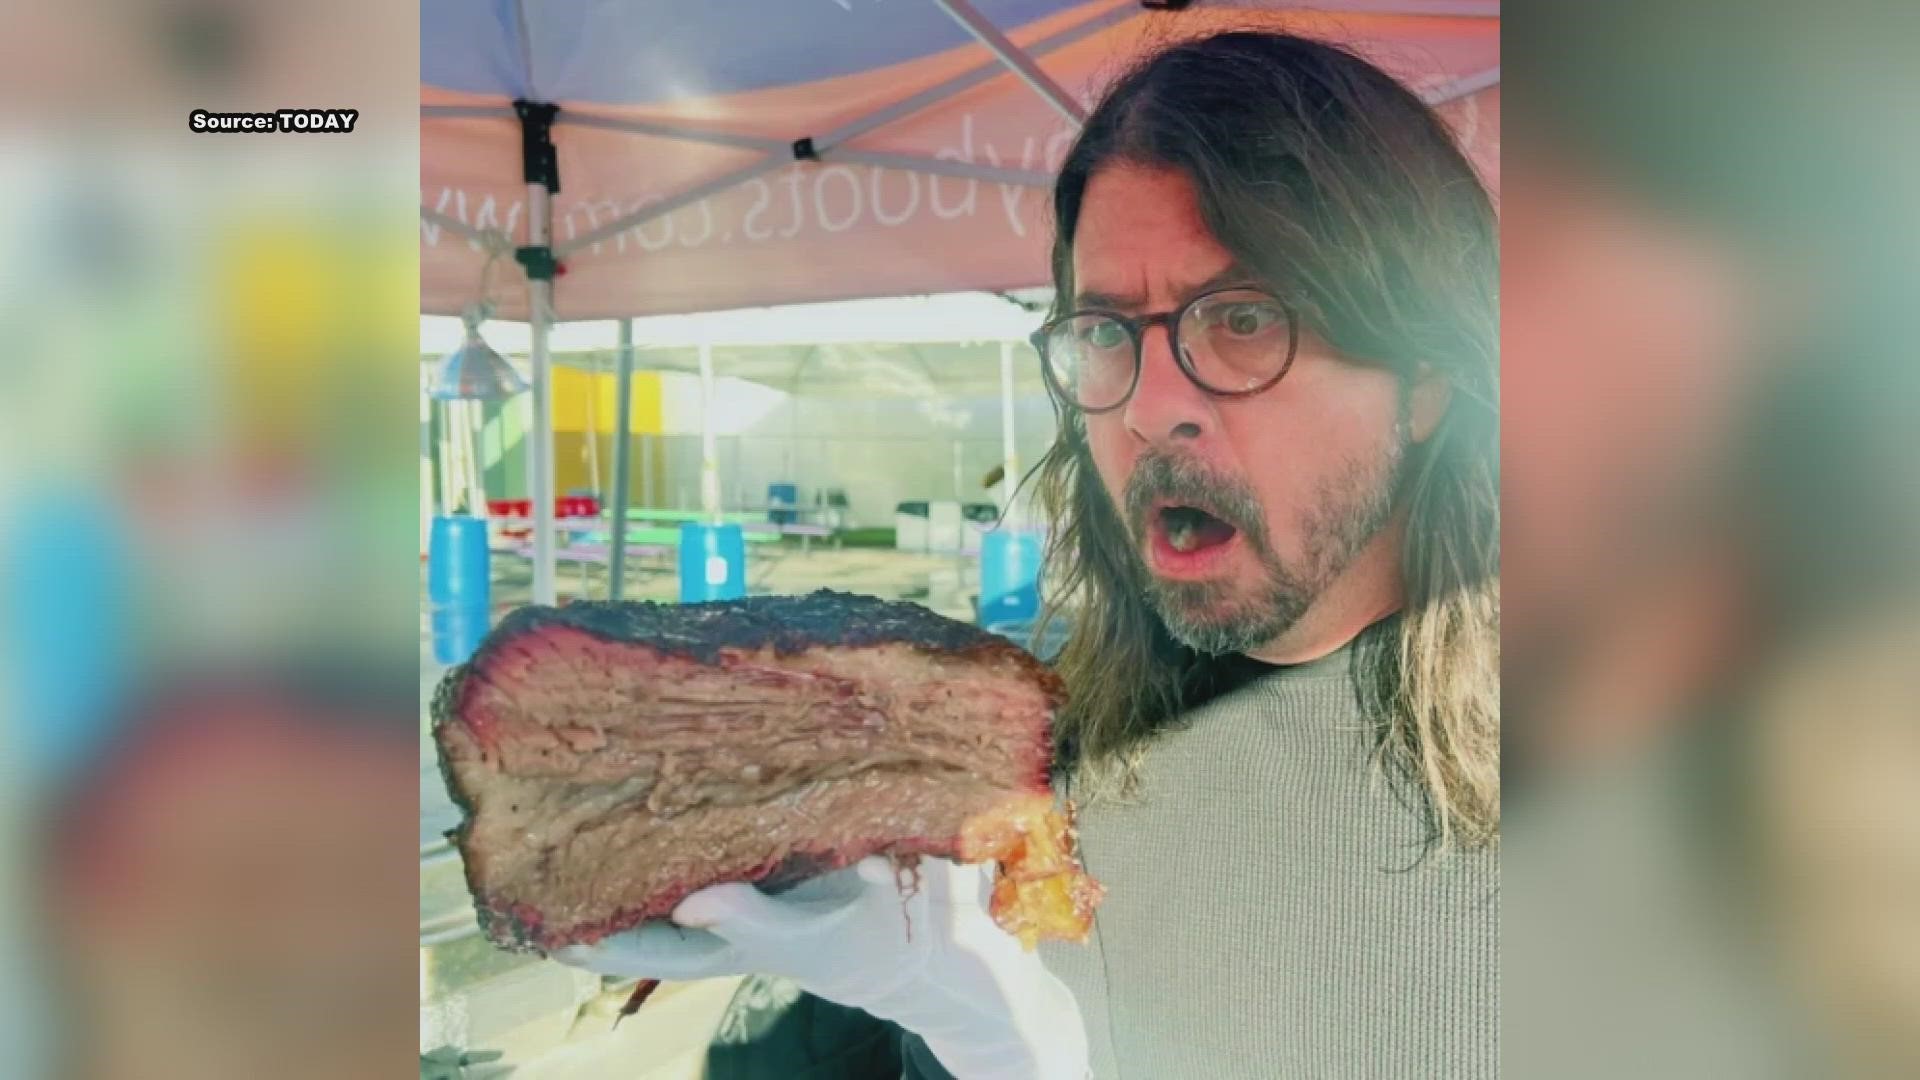 Foo Fighters, David Grohl dedicated 24 hours to volunteering at a Los Angeles shelter giving out BBQ and raising money.